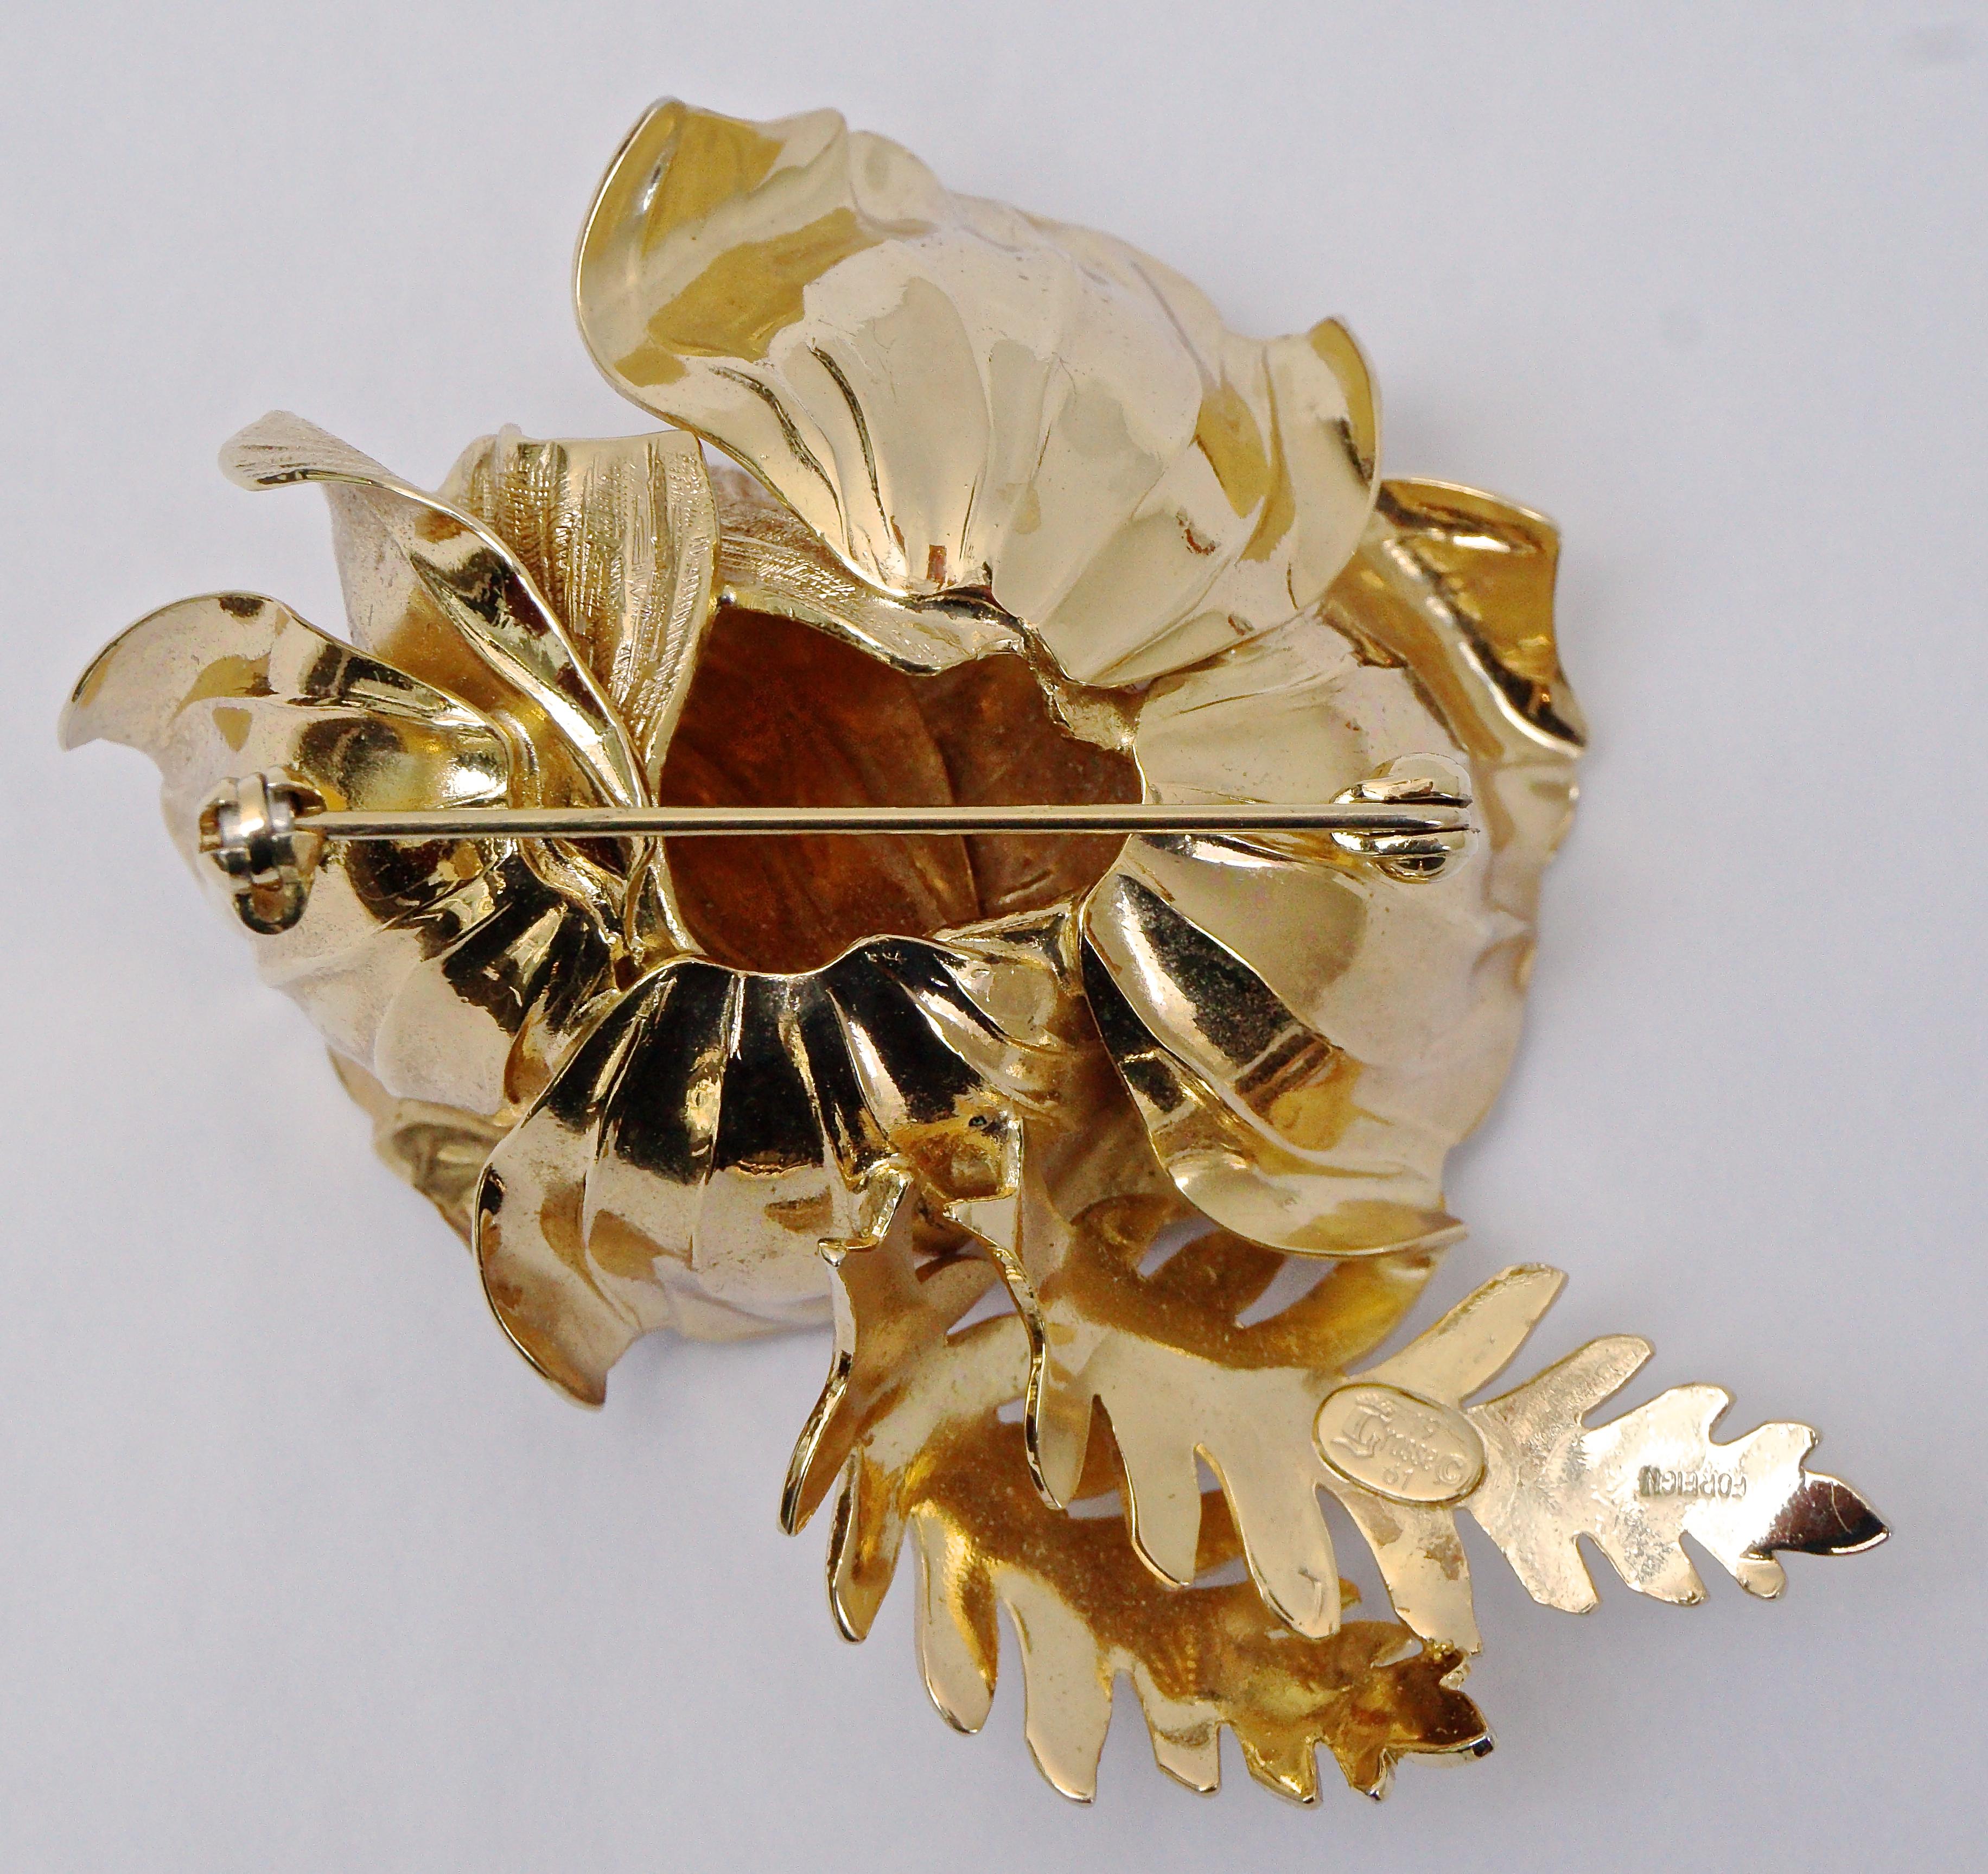 Fabulous Grossé gold plated vintage textured rose and leaves brooch, the back is shiny gold plate. Measuring 6.3cm / 2.48 inches by 4.3cm / 1.69 inches. The brooch is in very good condition.

This is a beautiful large and quality statement brooch by